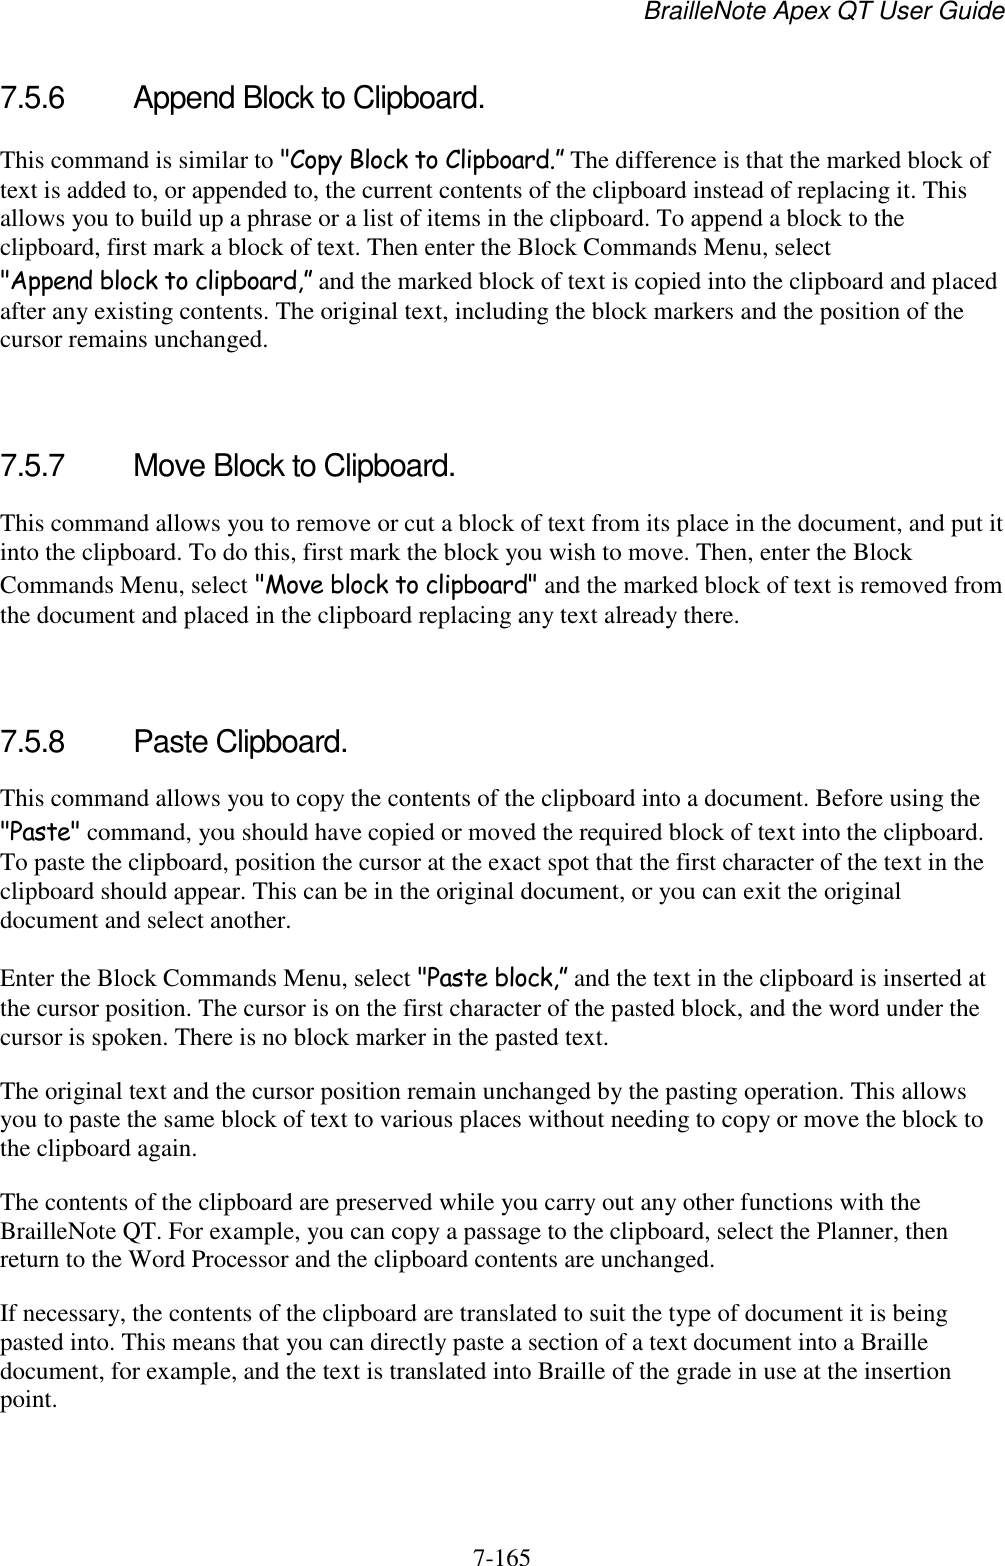 BrailleNote Apex QT User Guide  7-165   7.5.6  Append Block to Clipboard. This command is similar to &quot;Copy Block to Clipboard.” The difference is that the marked block of text is added to, or appended to, the current contents of the clipboard instead of replacing it. This allows you to build up a phrase or a list of items in the clipboard. To append a block to the clipboard, first mark a block of text. Then enter the Block Commands Menu, select &quot;Append block to clipboard,” and the marked block of text is copied into the clipboard and placed after any existing contents. The original text, including the block markers and the position of the cursor remains unchanged.   7.5.7  Move Block to Clipboard. This command allows you to remove or cut a block of text from its place in the document, and put it into the clipboard. To do this, first mark the block you wish to move. Then, enter the Block Commands Menu, select &quot;Move block to clipboard&quot; and the marked block of text is removed from the document and placed in the clipboard replacing any text already there.   7.5.8  Paste Clipboard. This command allows you to copy the contents of the clipboard into a document. Before using the &quot;Paste&quot; command, you should have copied or moved the required block of text into the clipboard. To paste the clipboard, position the cursor at the exact spot that the first character of the text in the clipboard should appear. This can be in the original document, or you can exit the original document and select another. Enter the Block Commands Menu, select &quot;Paste block,” and the text in the clipboard is inserted at the cursor position. The cursor is on the first character of the pasted block, and the word under the cursor is spoken. There is no block marker in the pasted text. The original text and the cursor position remain unchanged by the pasting operation. This allows you to paste the same block of text to various places without needing to copy or move the block to the clipboard again. The contents of the clipboard are preserved while you carry out any other functions with the BrailleNote QT. For example, you can copy a passage to the clipboard, select the Planner, then return to the Word Processor and the clipboard contents are unchanged. If necessary, the contents of the clipboard are translated to suit the type of document it is being pasted into. This means that you can directly paste a section of a text document into a Braille document, for example, and the text is translated into Braille of the grade in use at the insertion point.   